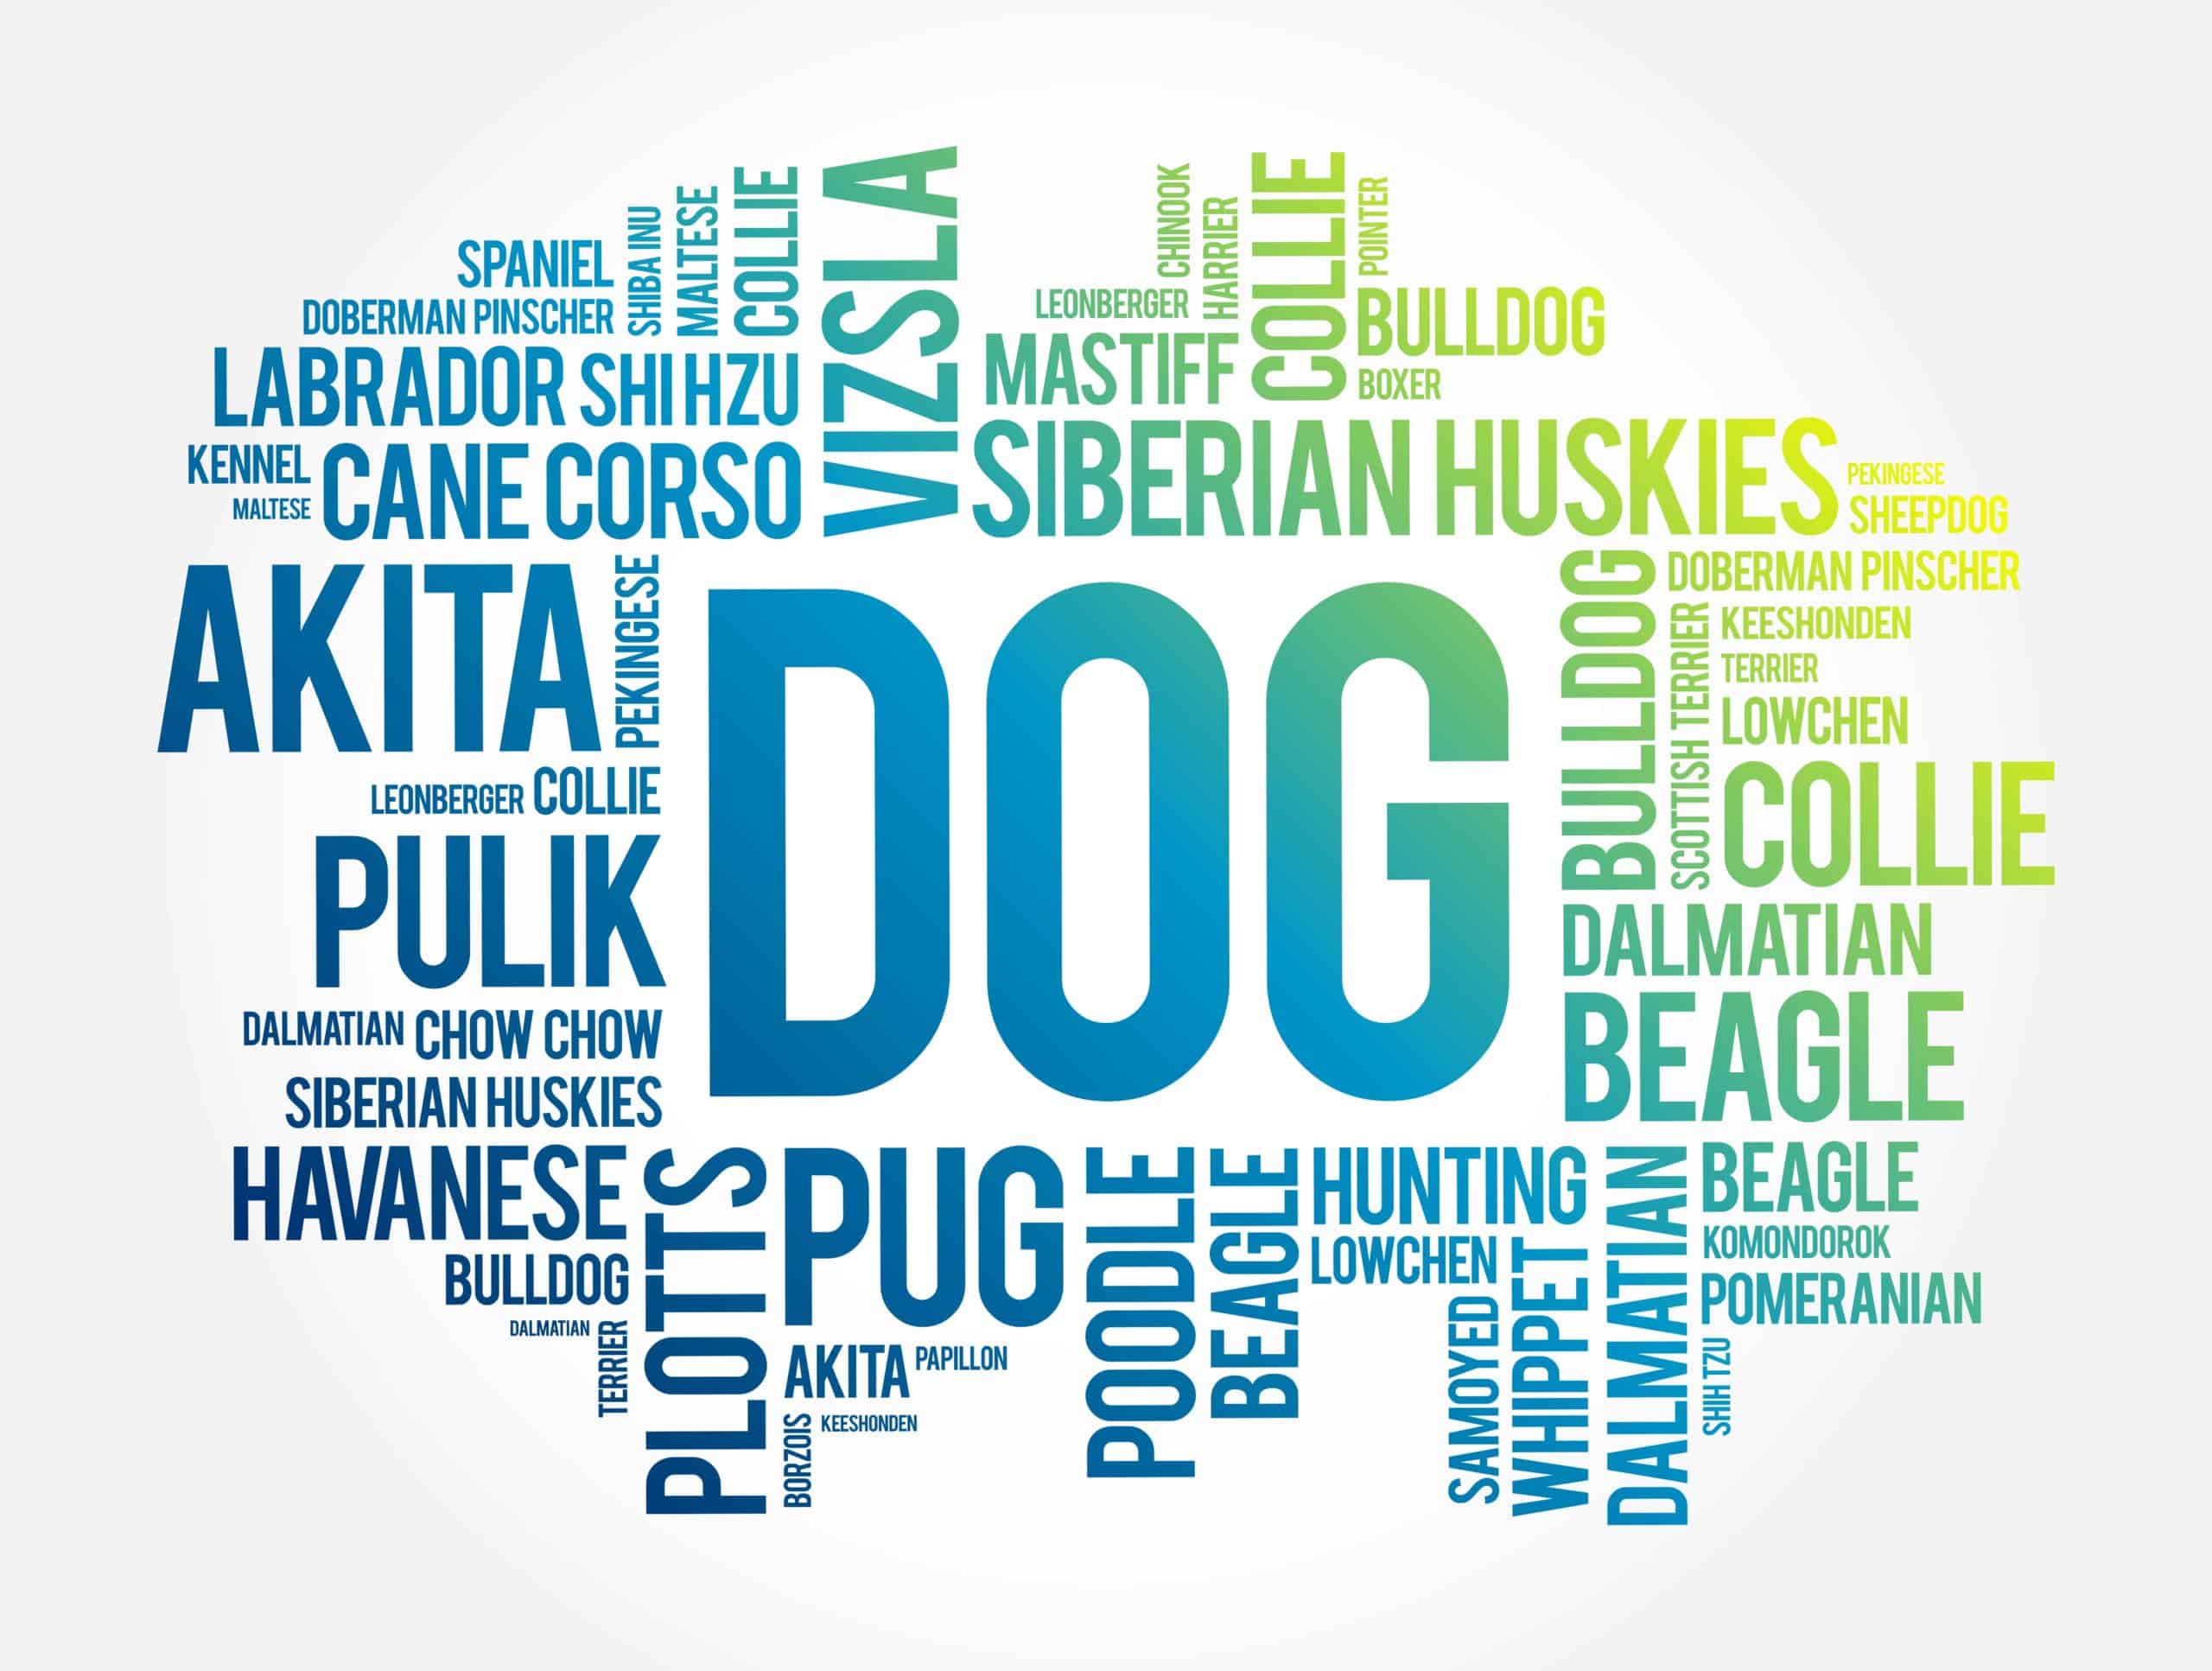 Choosing the right dog diagram of dog breed names. Before choosing the right dog for you, be sure to do your research and find a breed that matches both your lifestyle and personality.